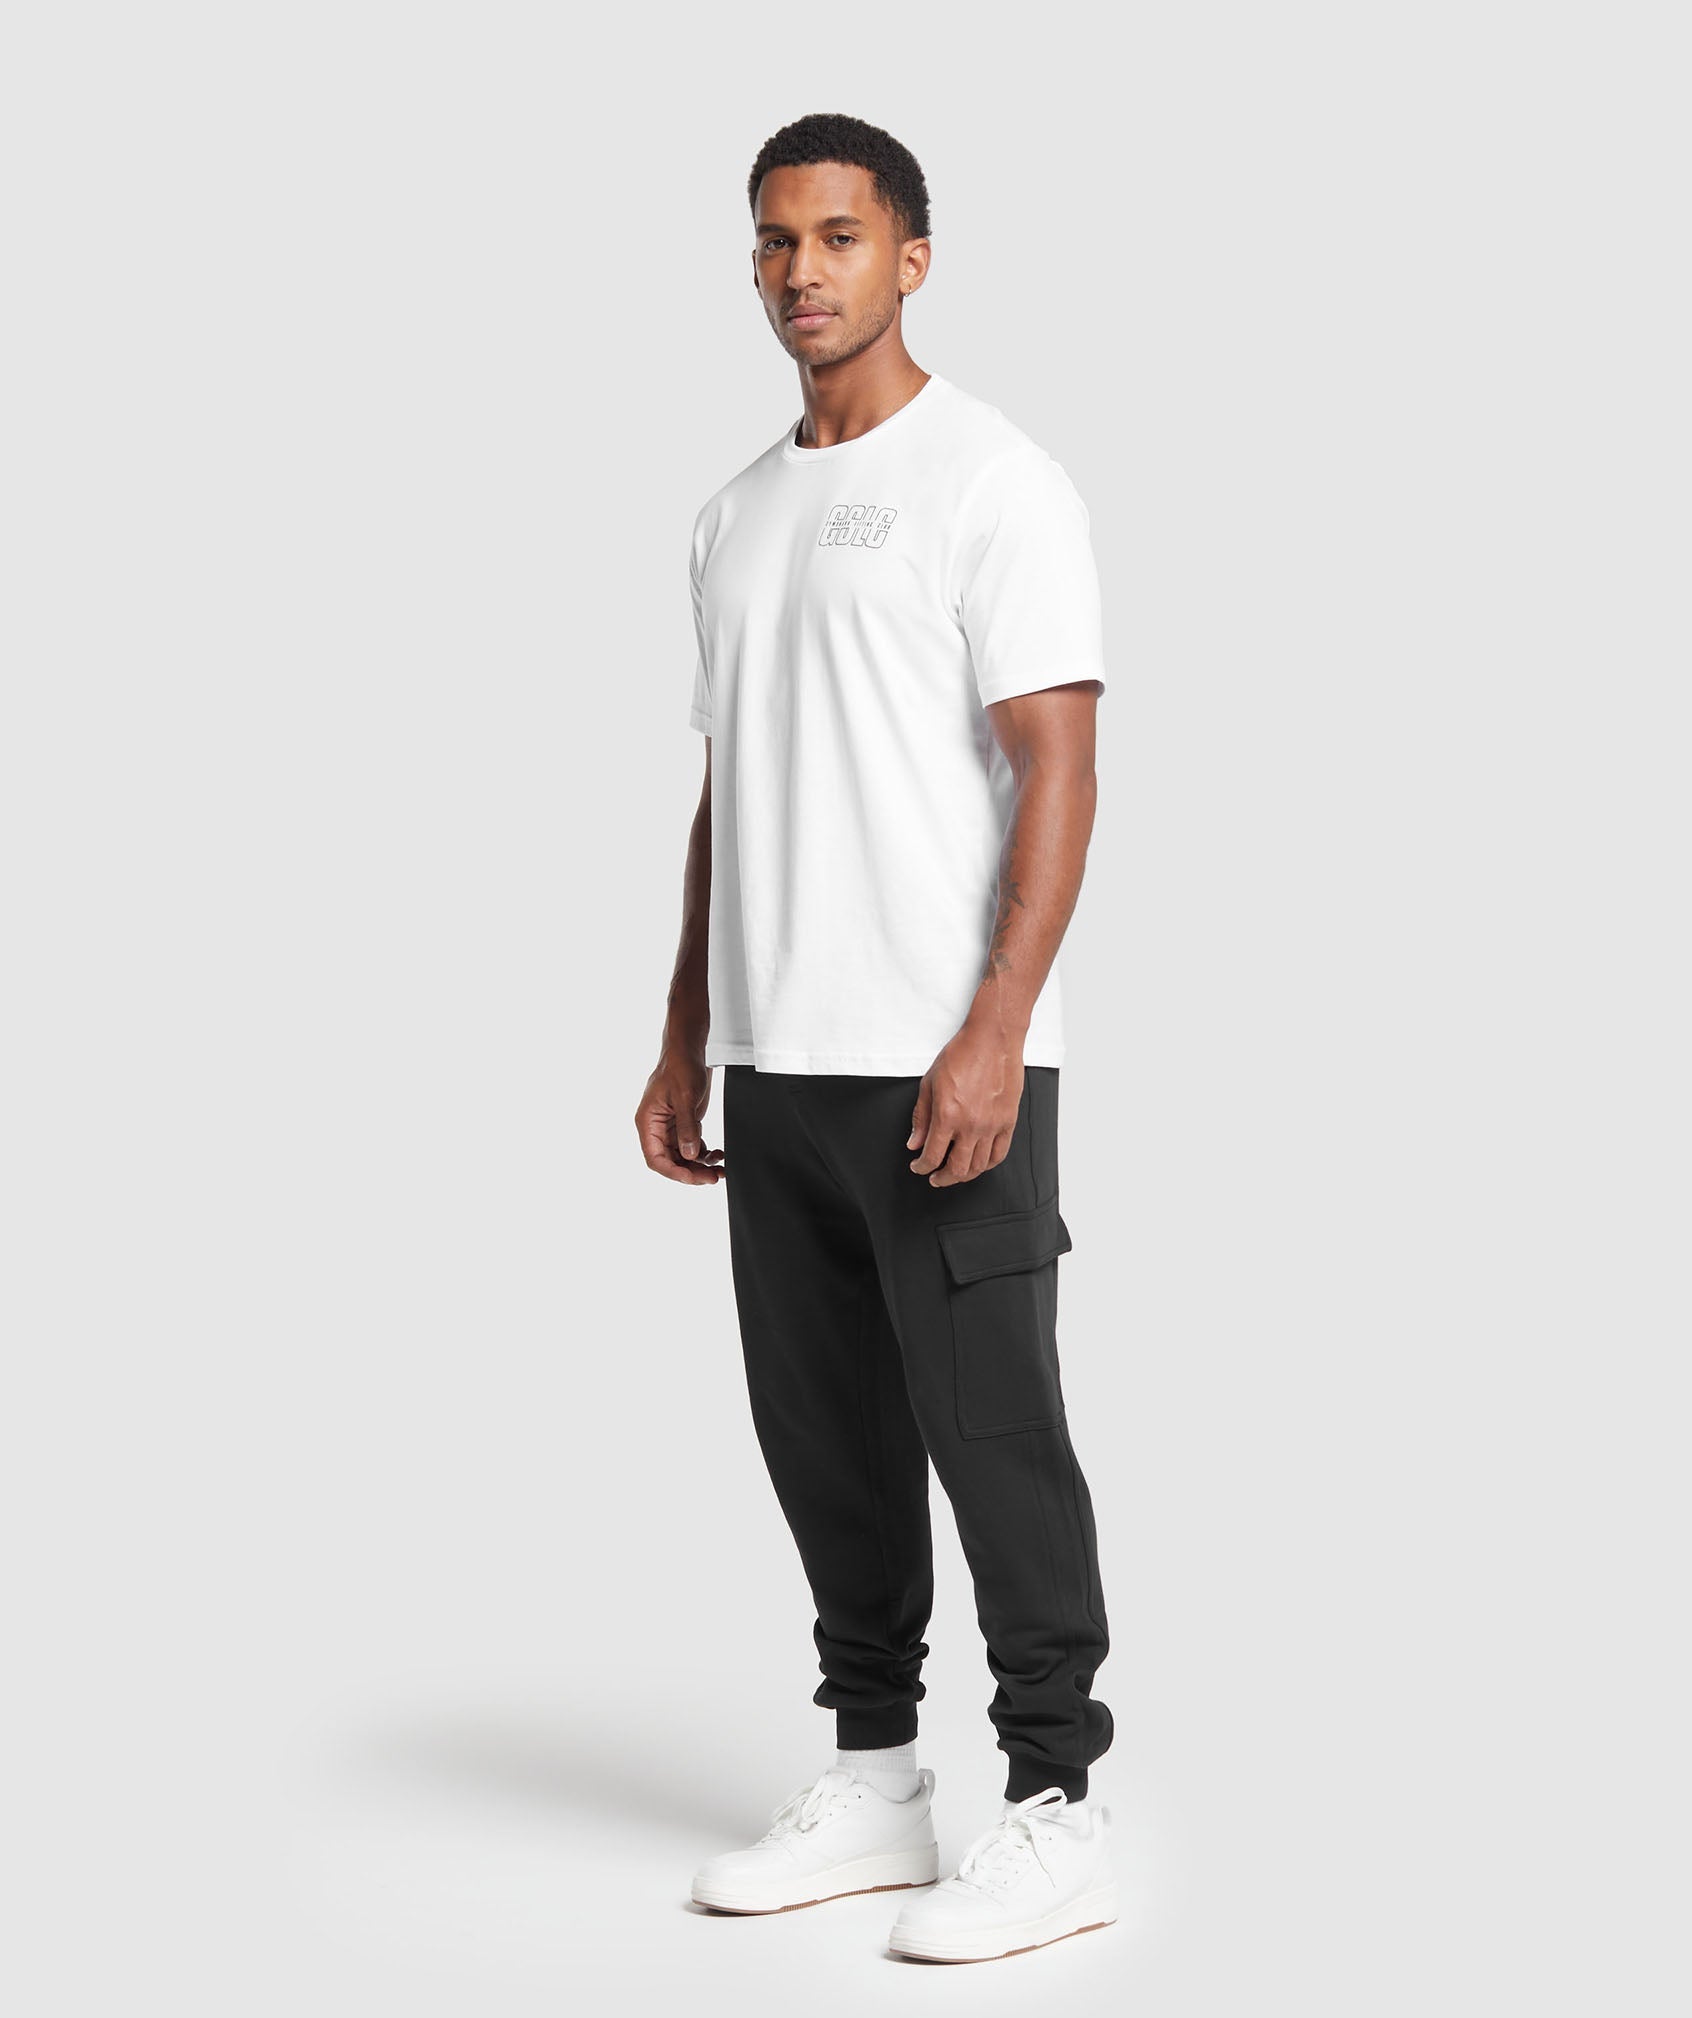 Rest Day Essentials Cargo Joggers in Black - view 4